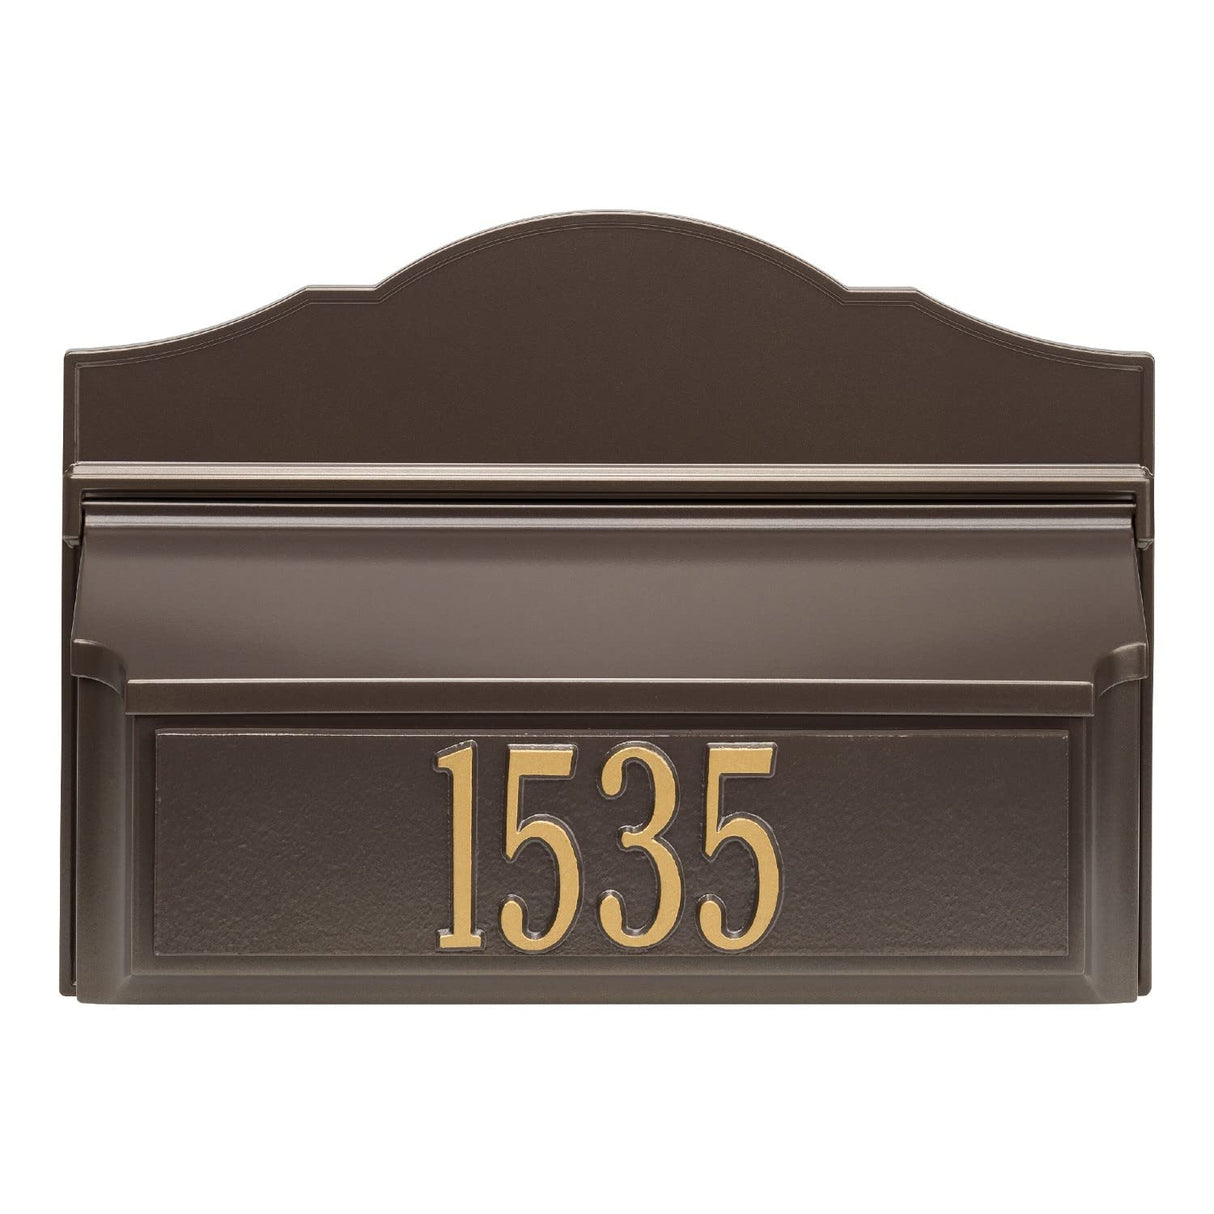 Whitehall 11255 - Colonial Wall Mailbox Package #2 (Mailbox & Plaque)